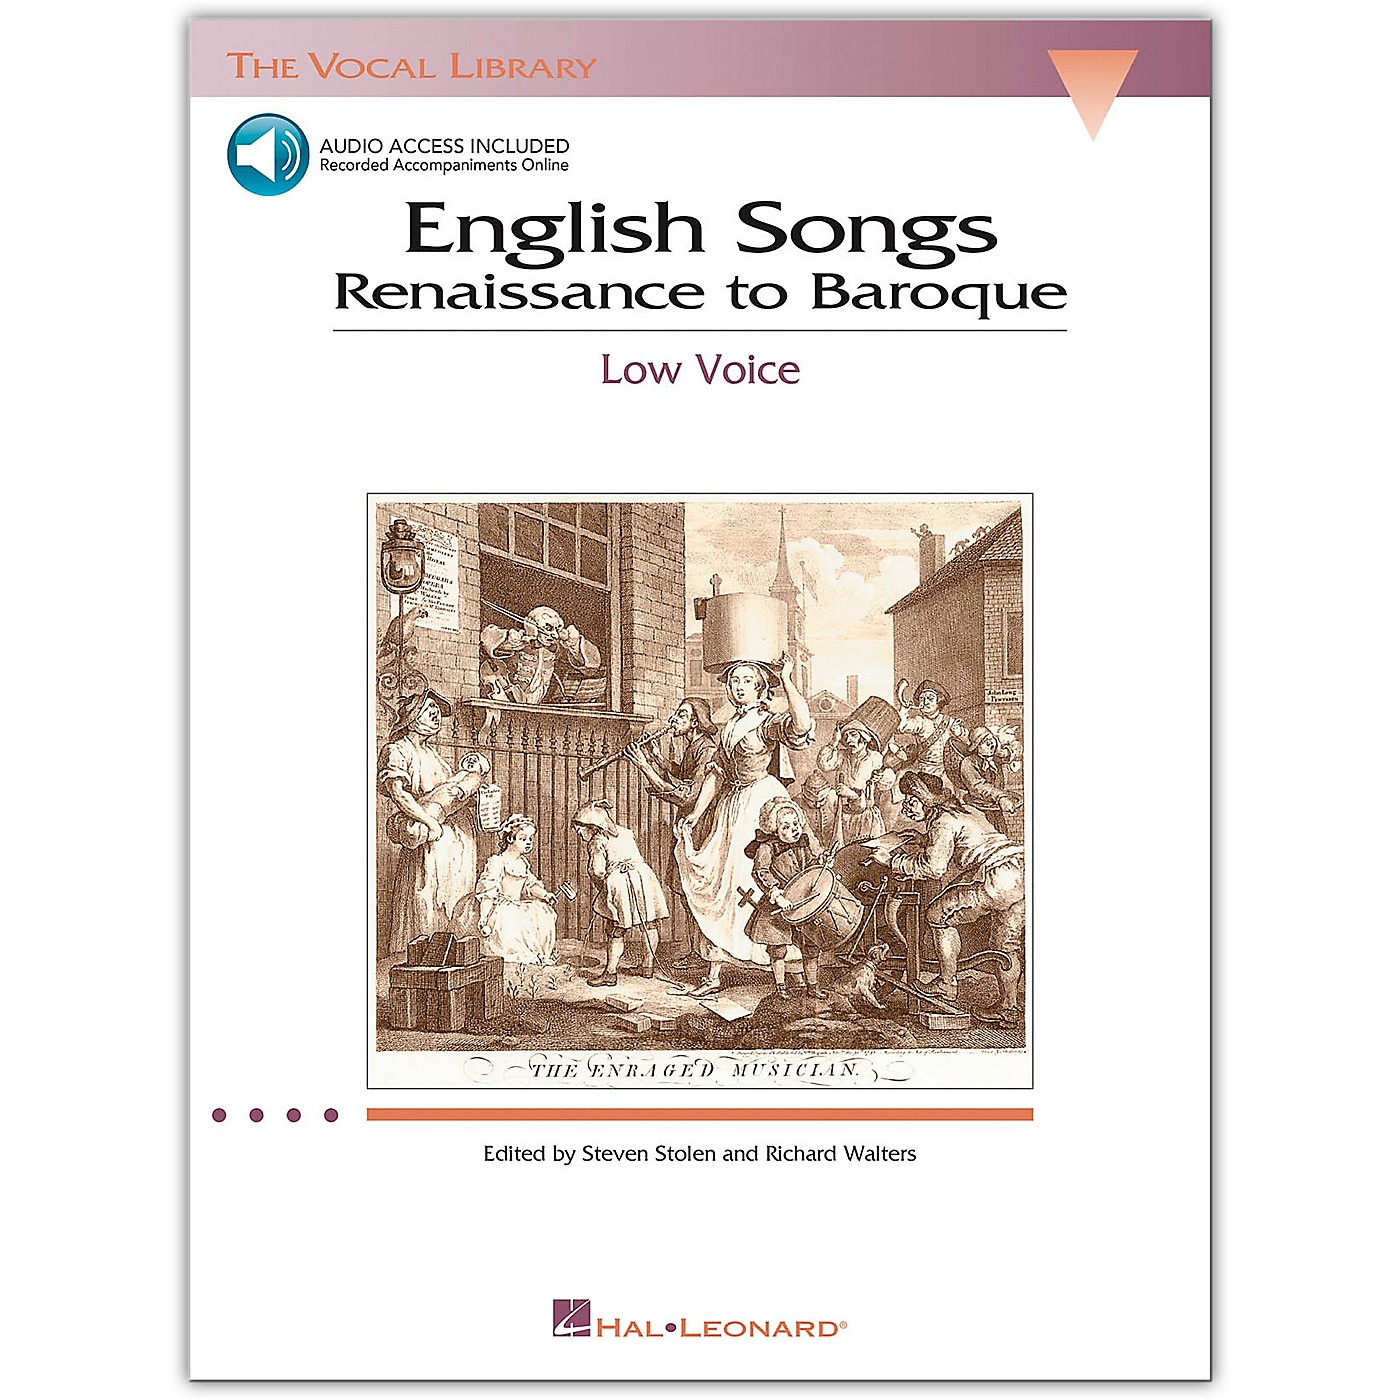 Hal Leonard The Vocal Library Series - English Songs: Renaissance To Baroque for Low Voice (Book/Online Audio) thumbnail